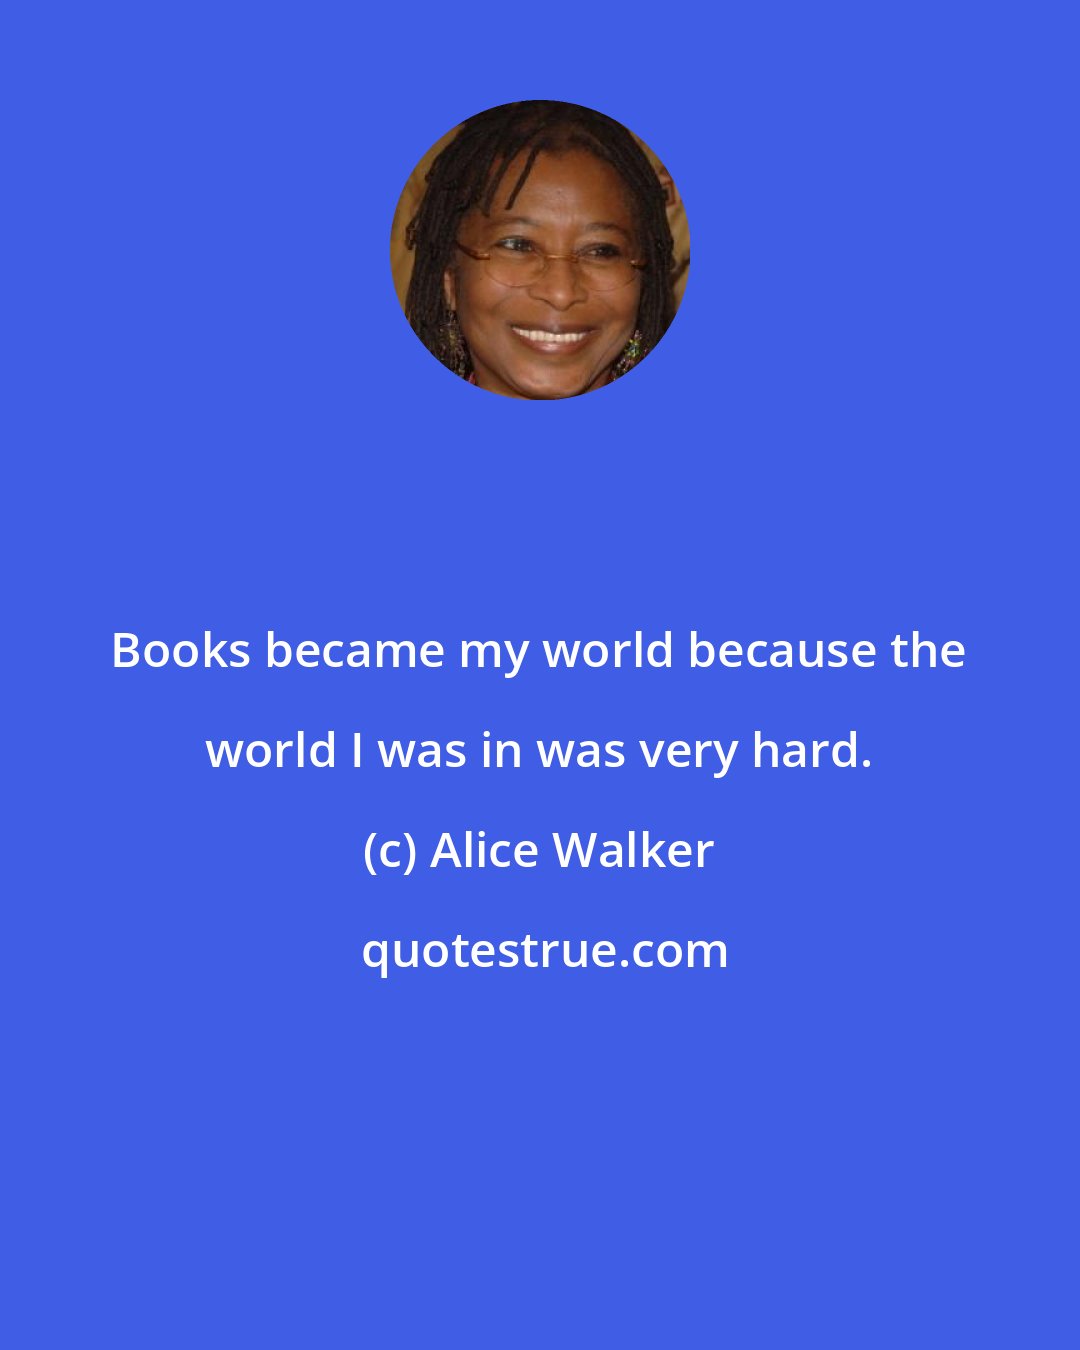 Alice Walker: Books became my world because the world I was in was very hard.